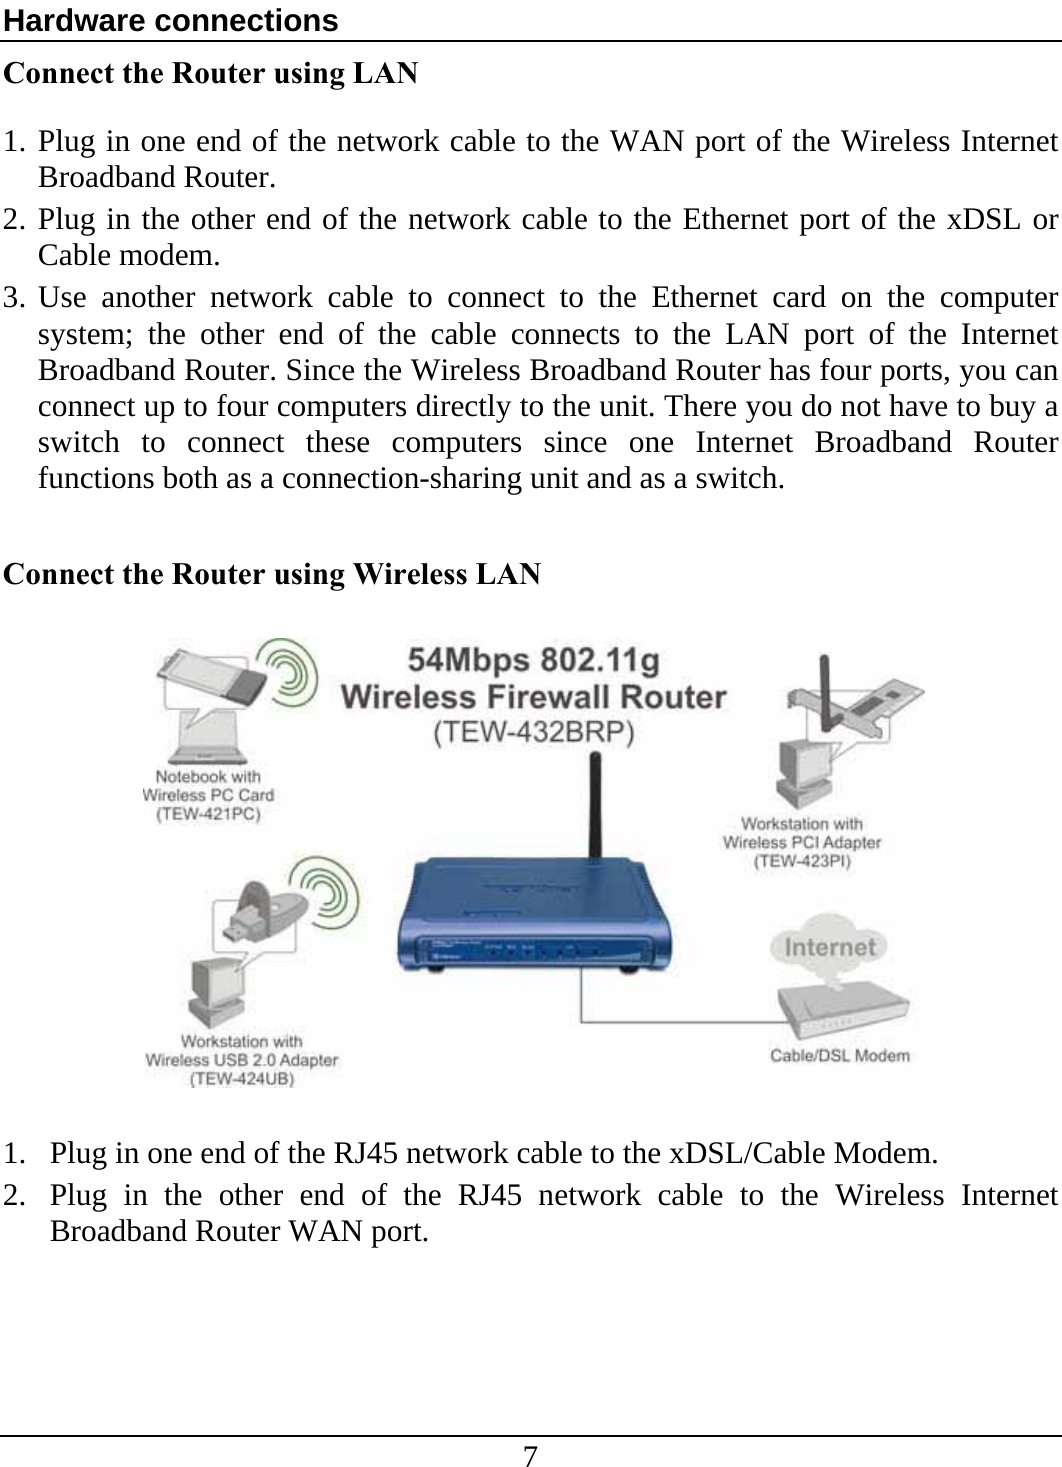 7 Hardware connections Connect the Router using LAN  1. Plug in one end of the network cable to the WAN port of the Wireless Internet Broadband Router. 2. Plug in the other end of the network cable to the Ethernet port of the xDSL or Cable modem. 3. Use another network cable to connect to the Ethernet card on the computer system; the other end of the cable connects to the LAN port of the Internet Broadband Router. Since the Wireless Broadband Router has four ports, you can connect up to four computers directly to the unit. There you do not have to buy a switch to connect these computers since one Internet Broadband Router functions both as a connection-sharing unit and as a switch.  Connect the Router using Wireless LAN    1. Plug in one end of the RJ45 network cable to the xDSL/Cable Modem. 2. Plug in the other end of the RJ45 network cable to the Wireless Internet Broadband Router WAN port. 